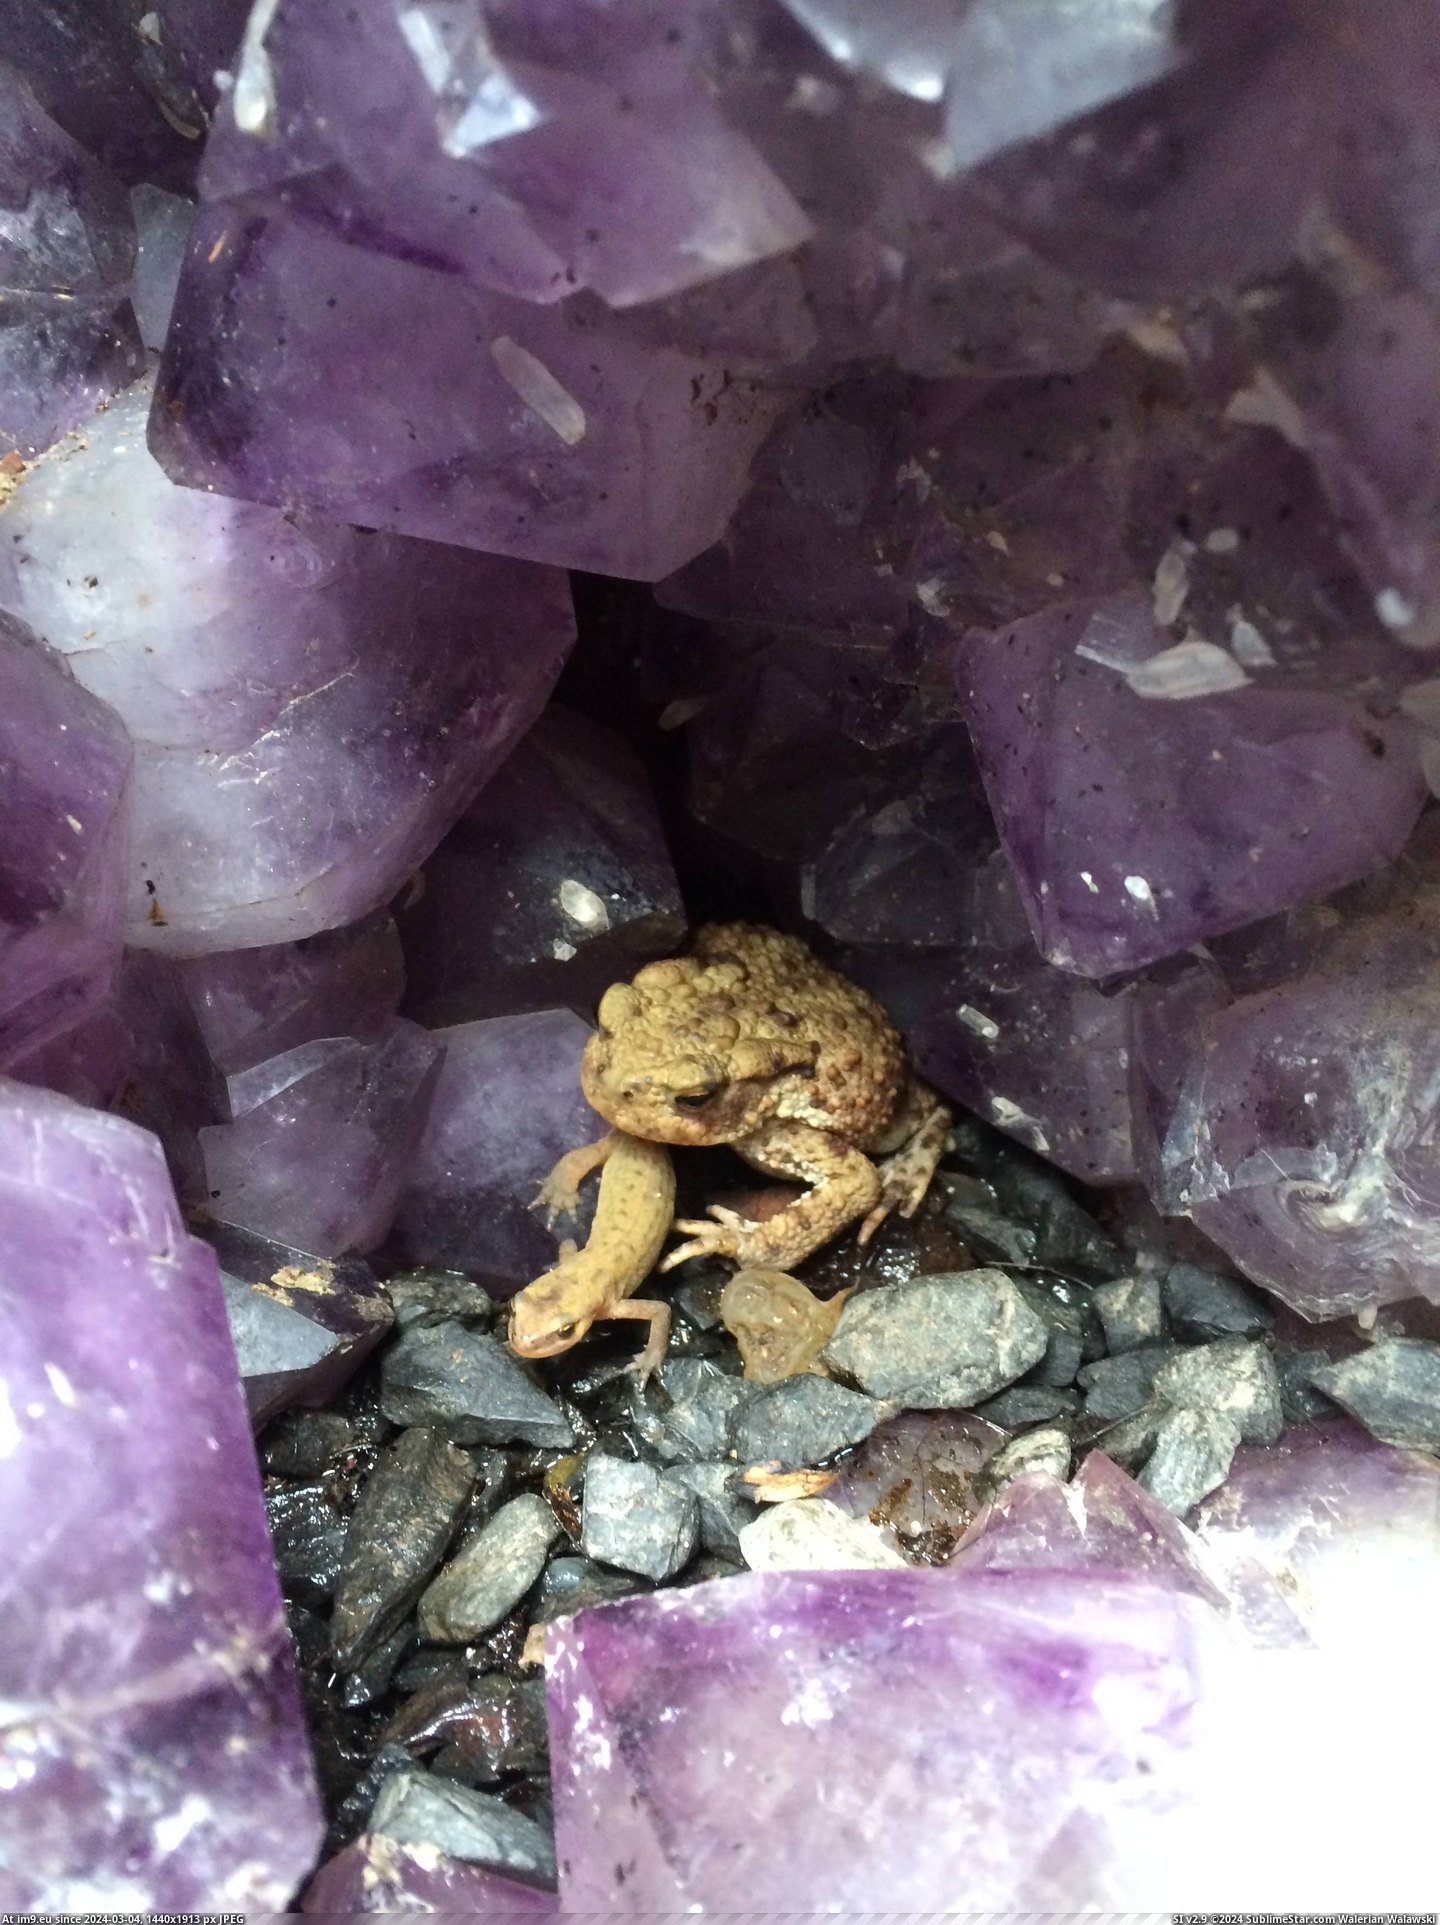 #Saw #Sitting #Cubby #Newt #Amethyst #Toad [Mildlyinteresting] Saw a toad sitting on a newt in an amethyst cubby Pic. (Image of album My r/MILDLYINTERESTING favs))